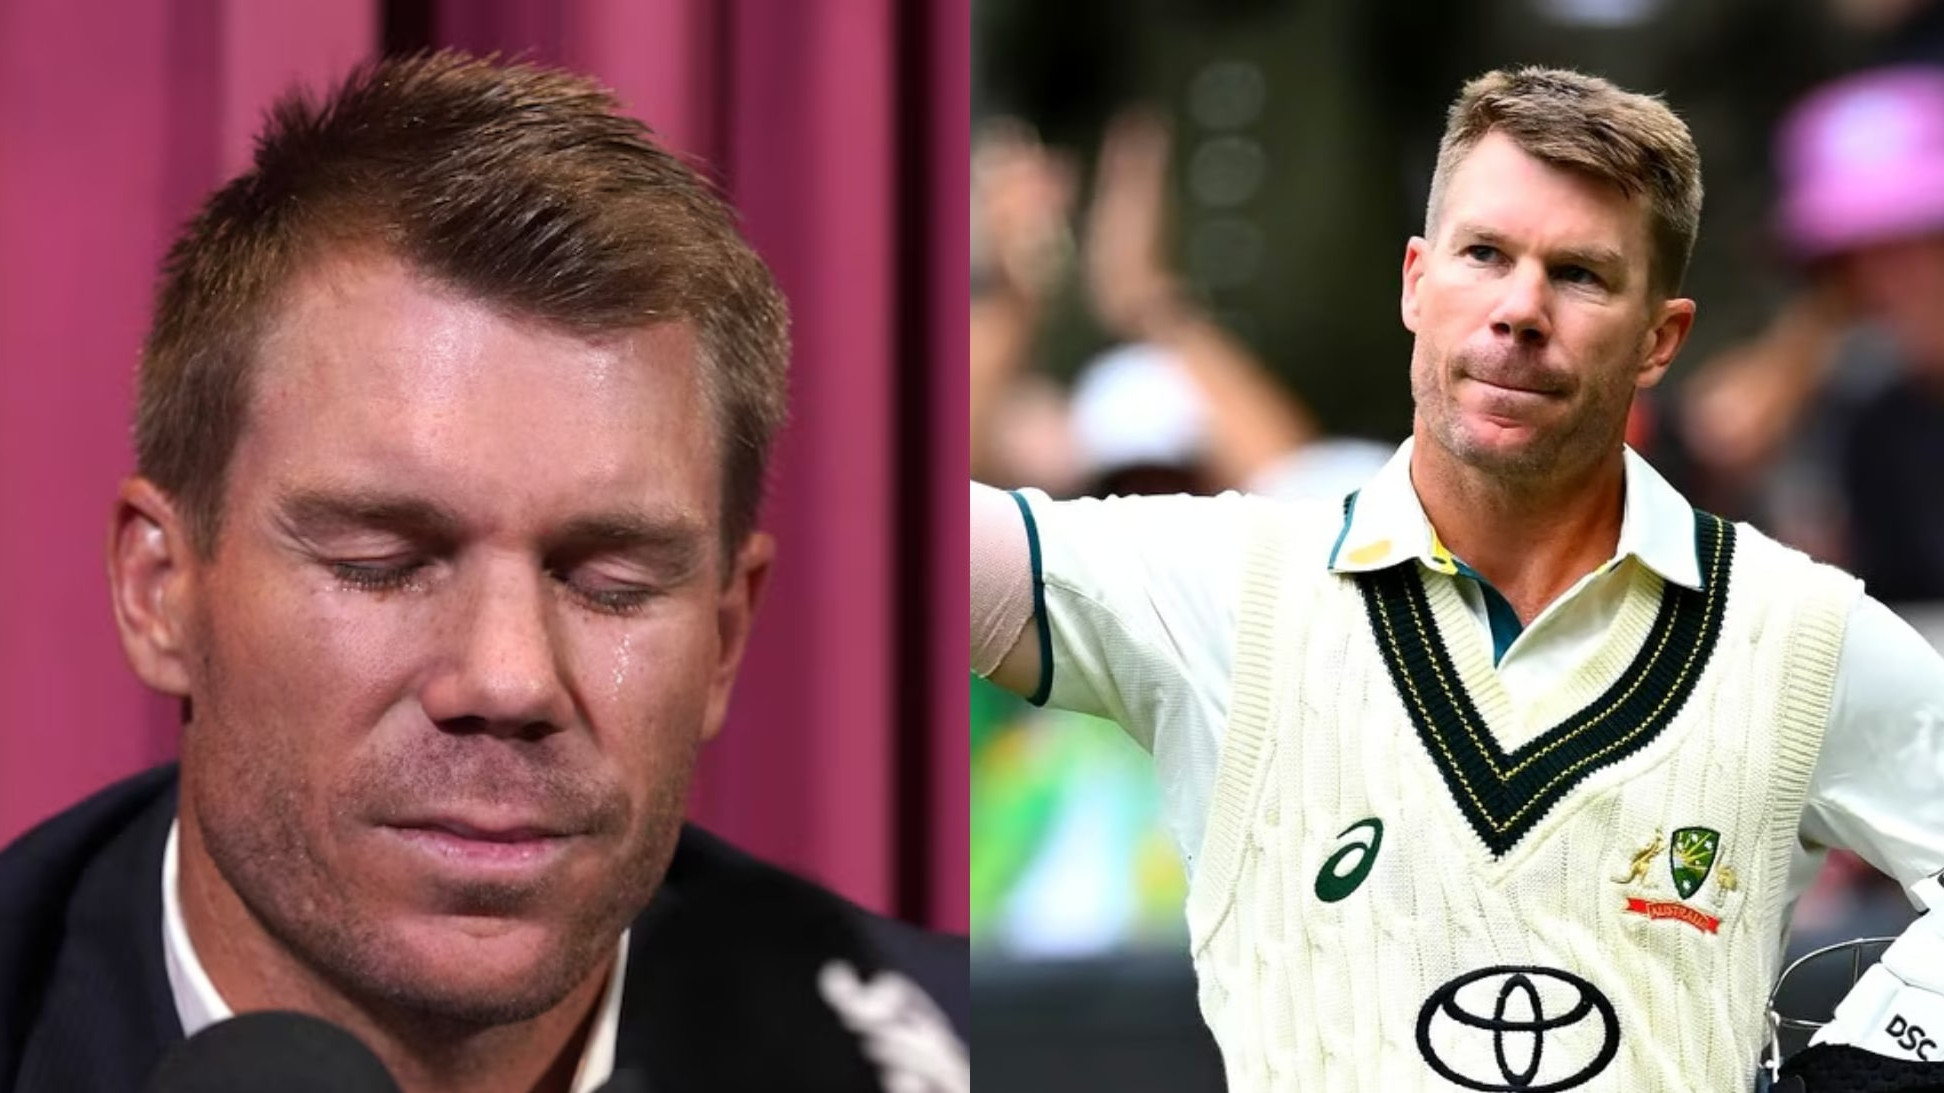 “Going to raise some eyebrows”- David Warner promises his autobiography will be ‘an interesting read’